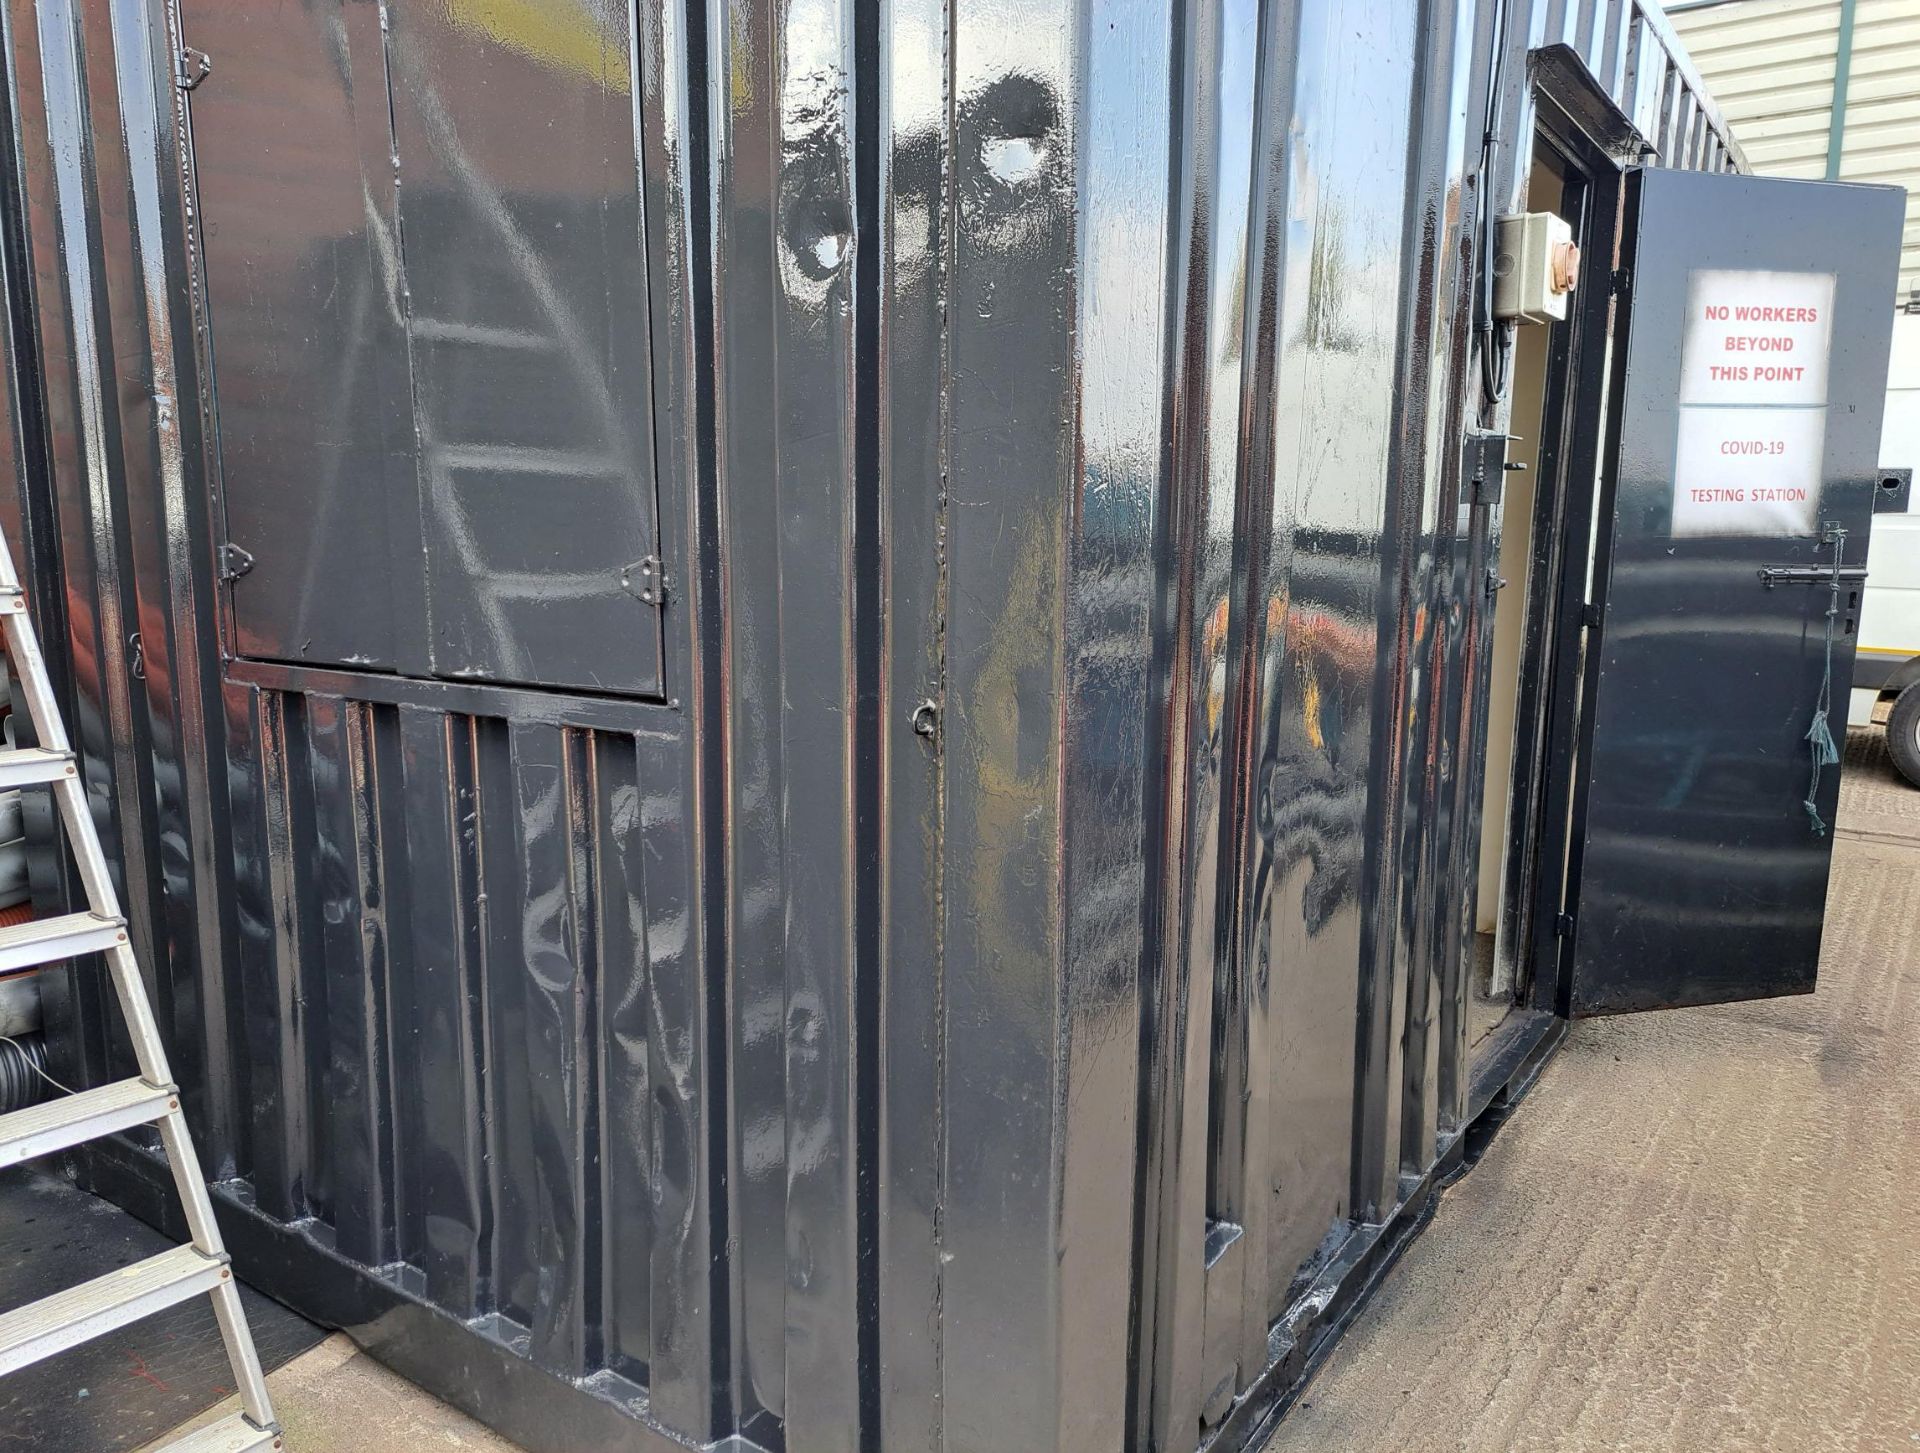 20'0" X 10'0" Lockable Steel Container - Ref: 76 - CL464 - Location: Liverpool L19